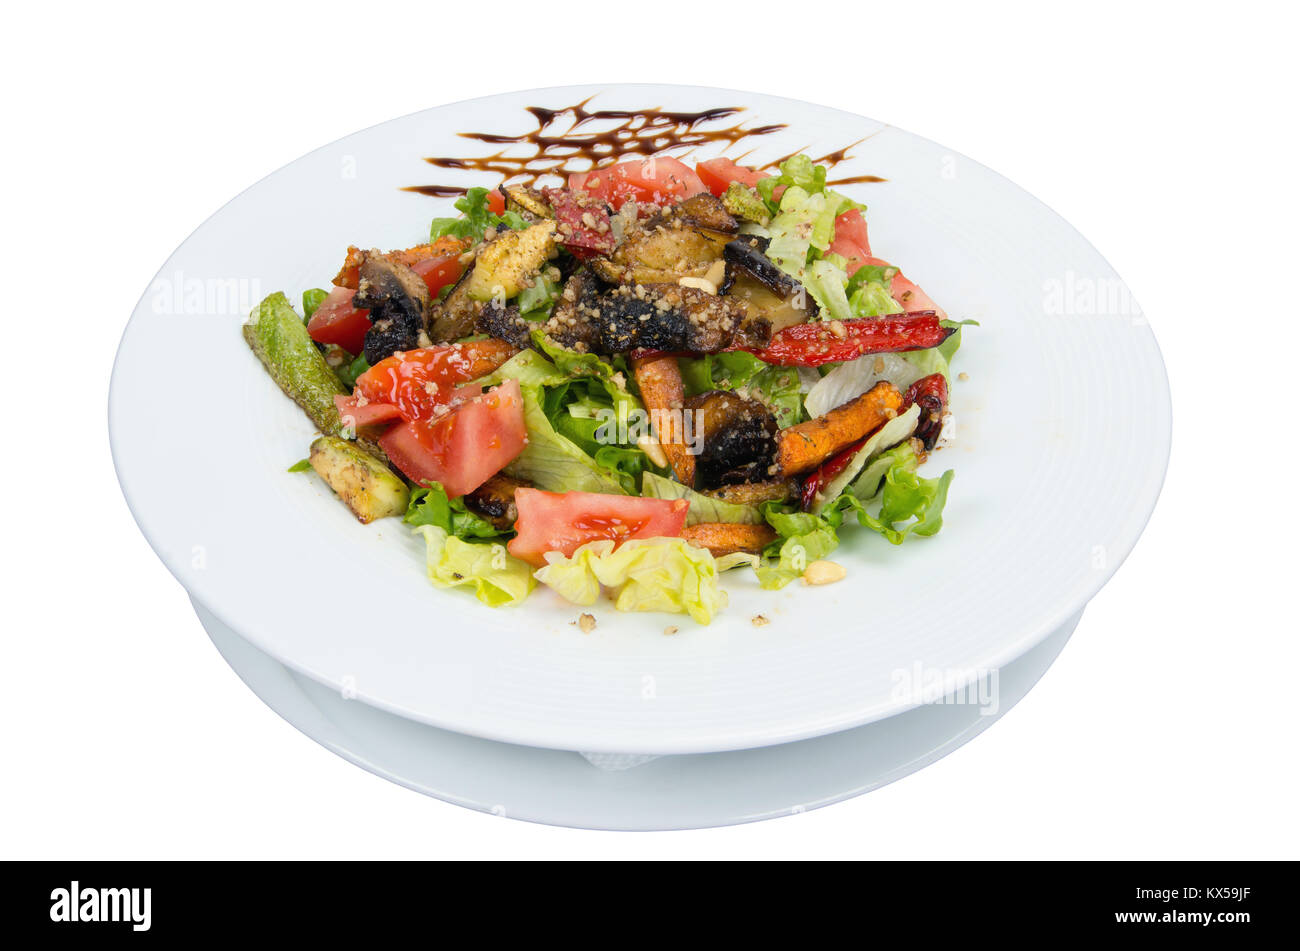 Salad. Vegetables baked on barbecue. On a white background. Stock Photo